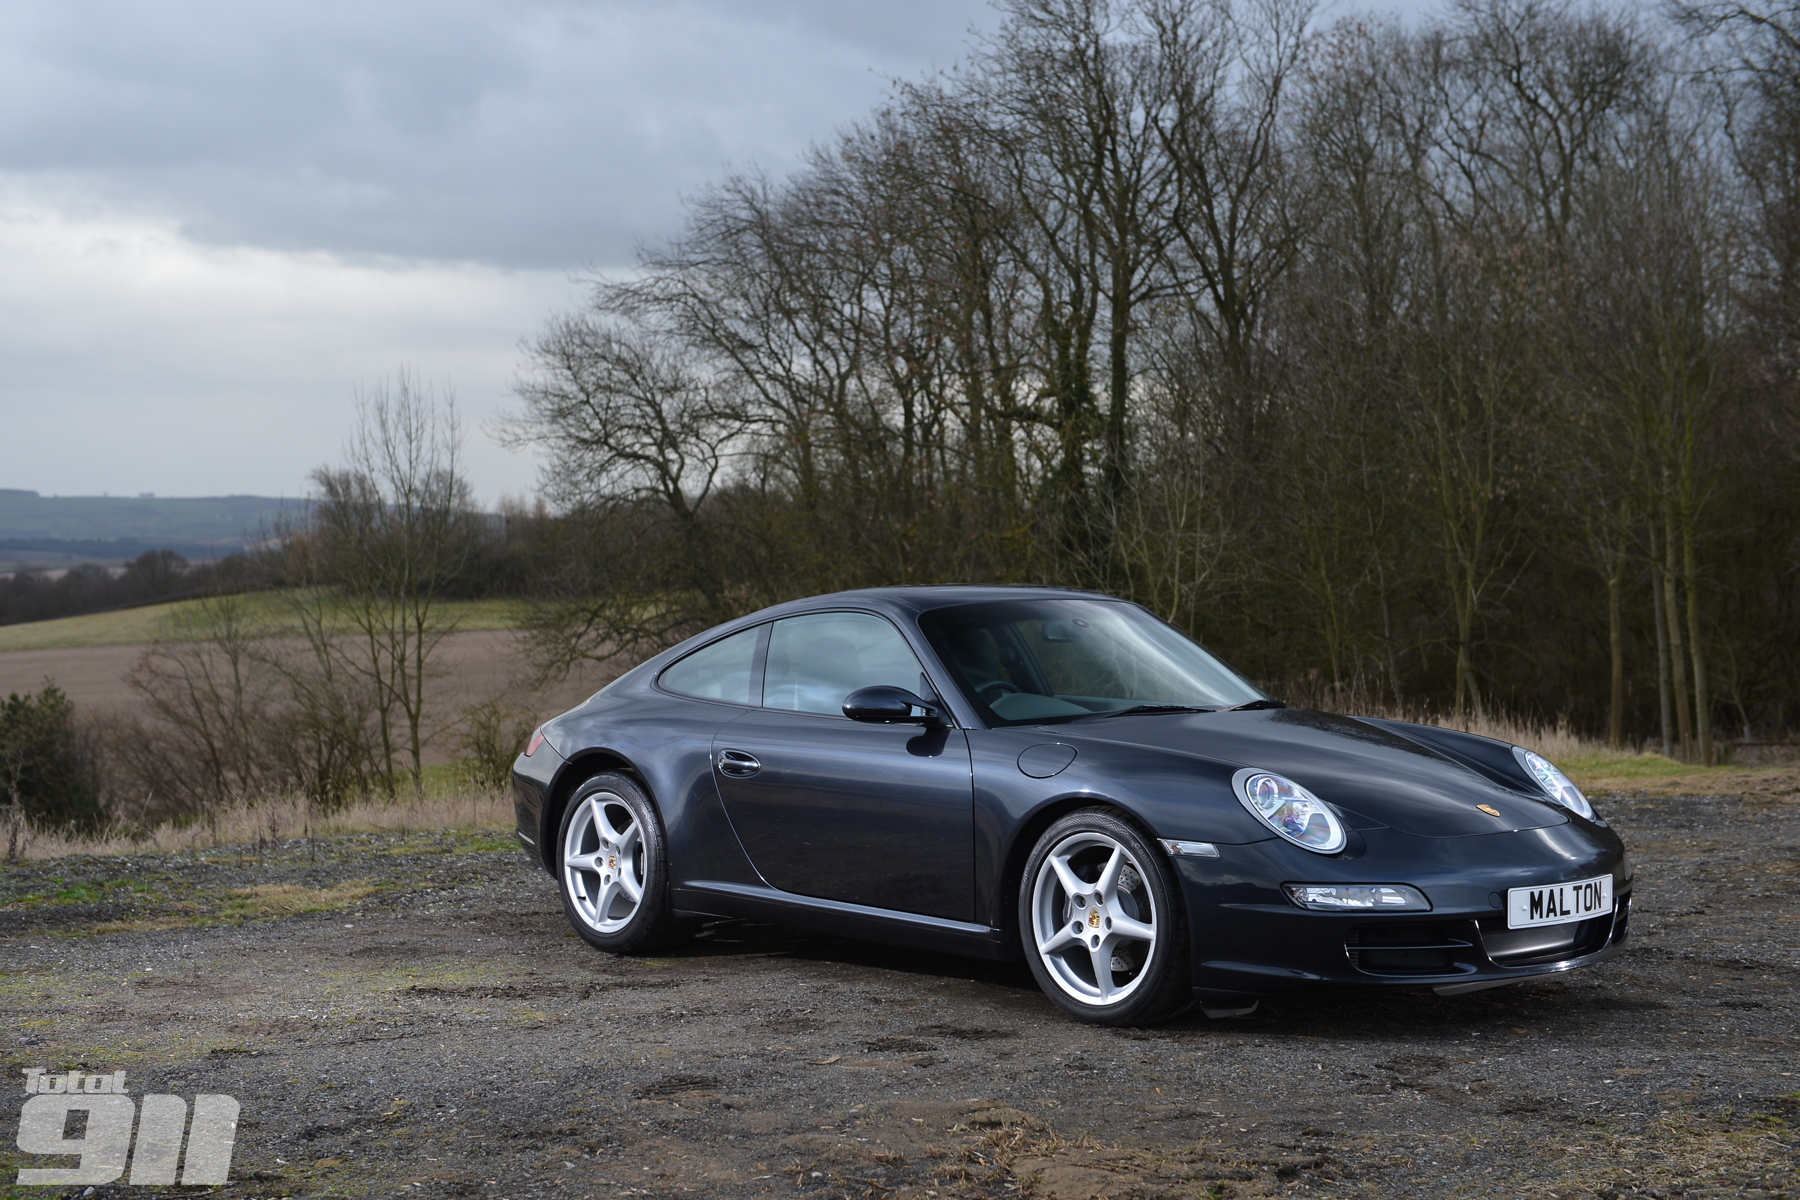 Sales debate: How much further will Porsche 997 prices fall? - Total 911